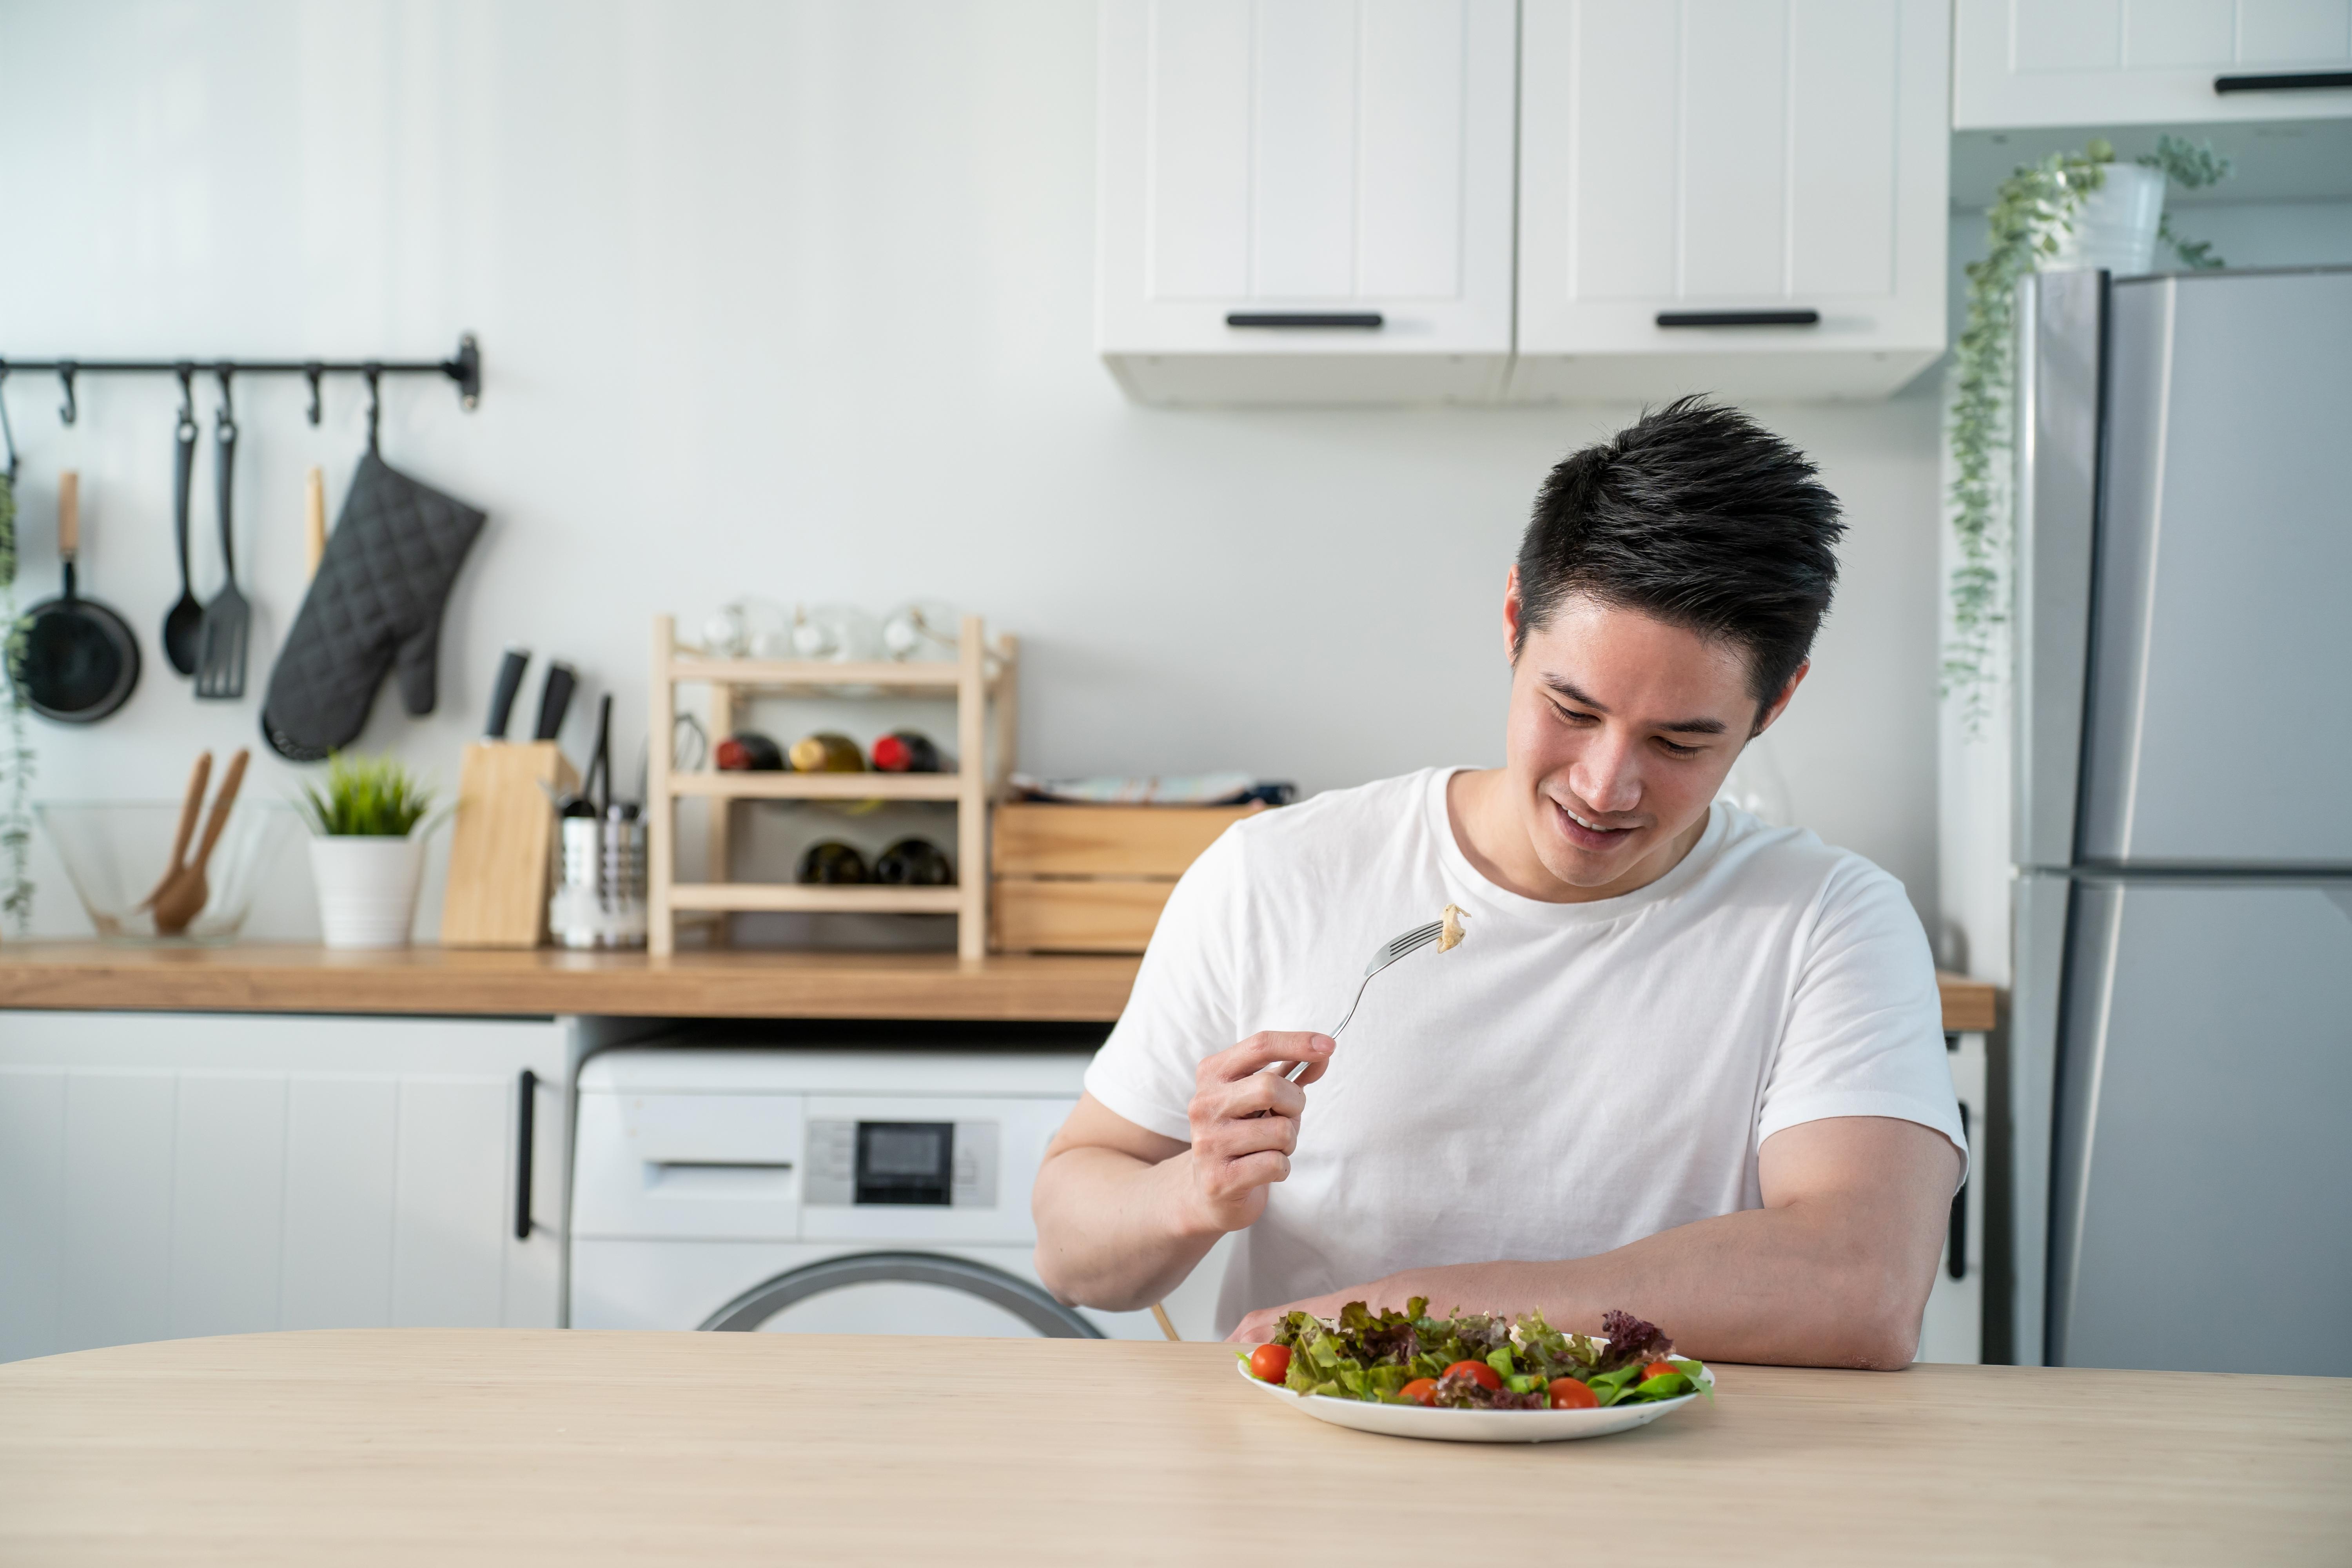 A single man enjoys a healthy gourmet meal alone in his kitchen. 